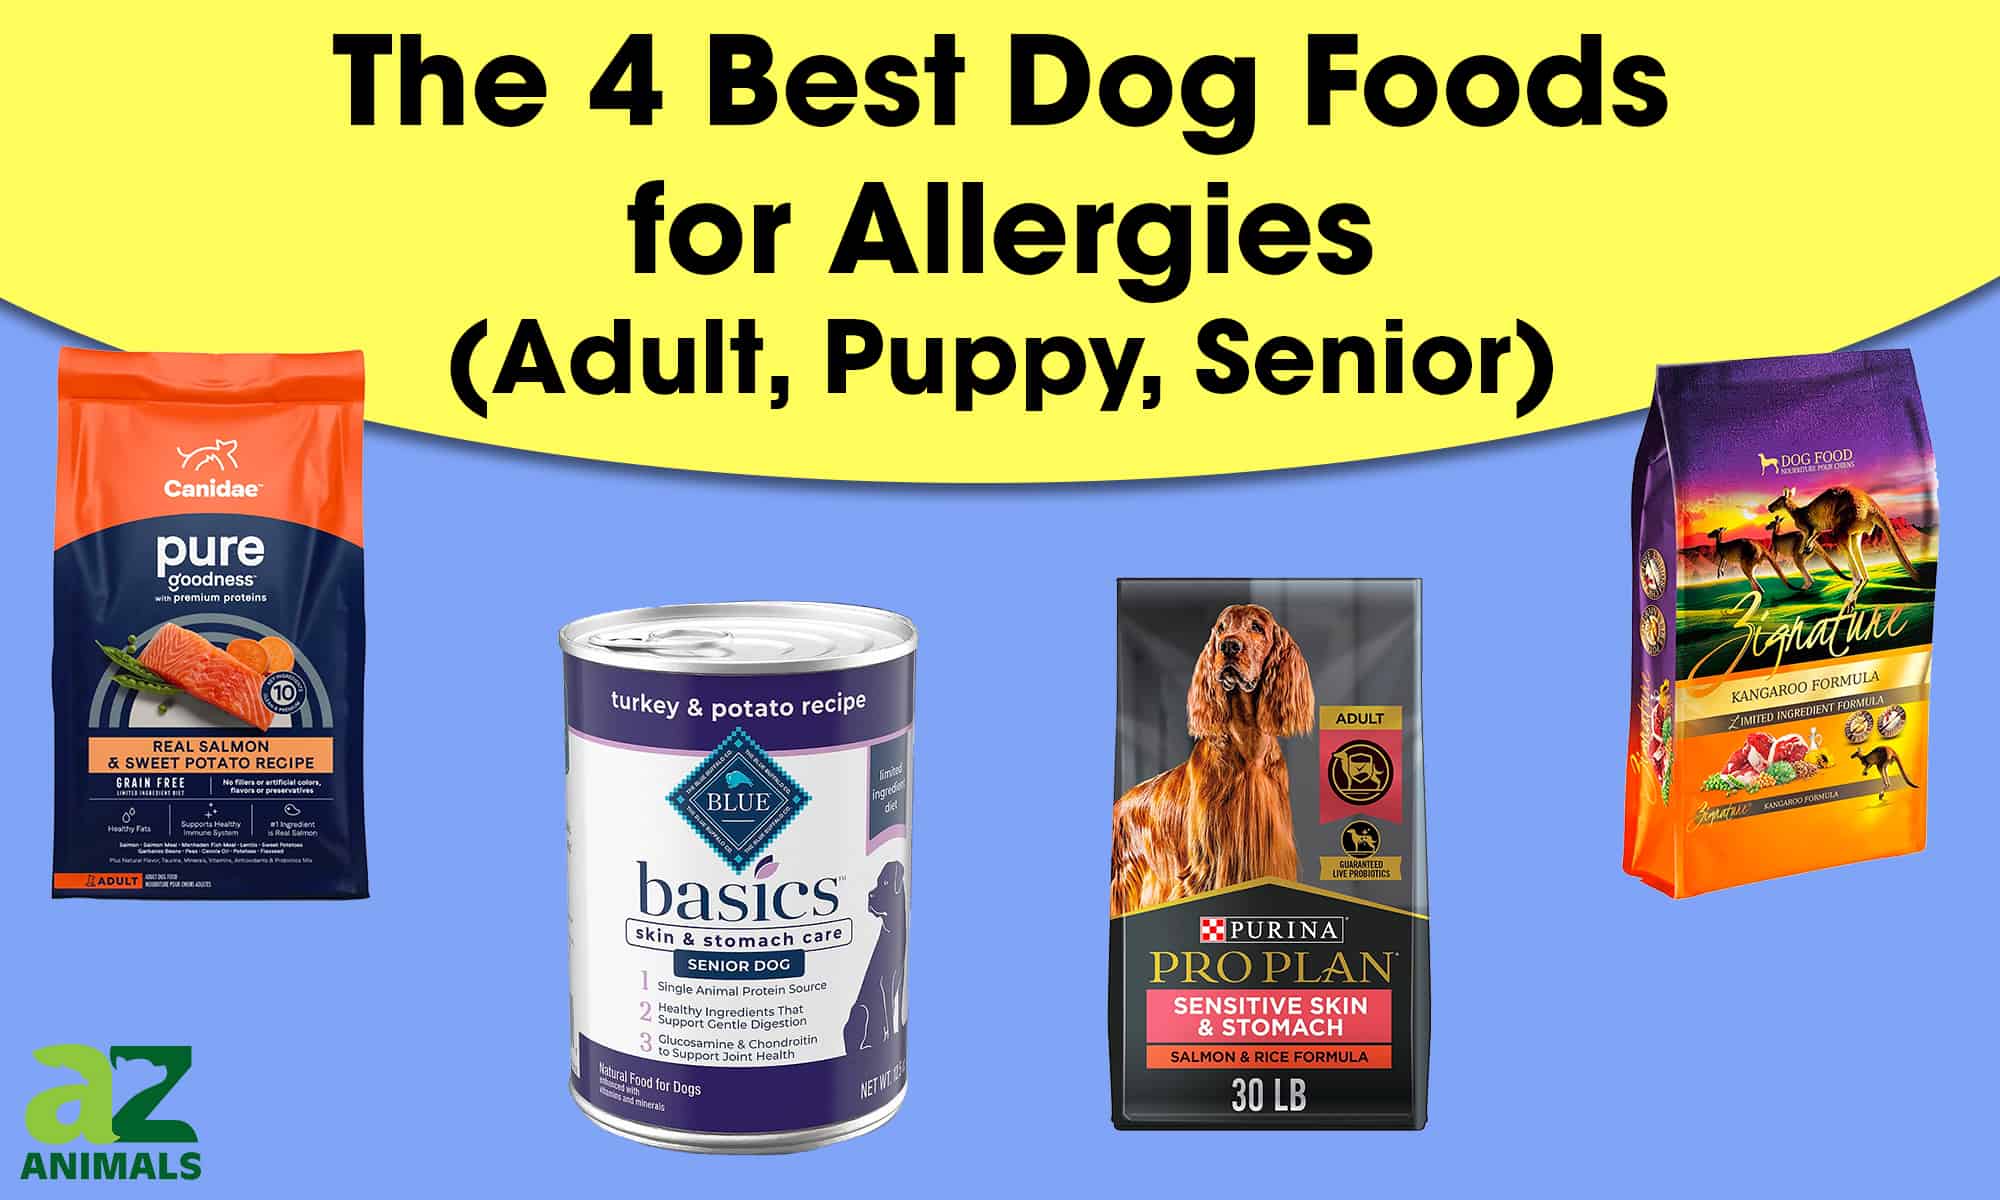 Some dog foods work better for allergies.